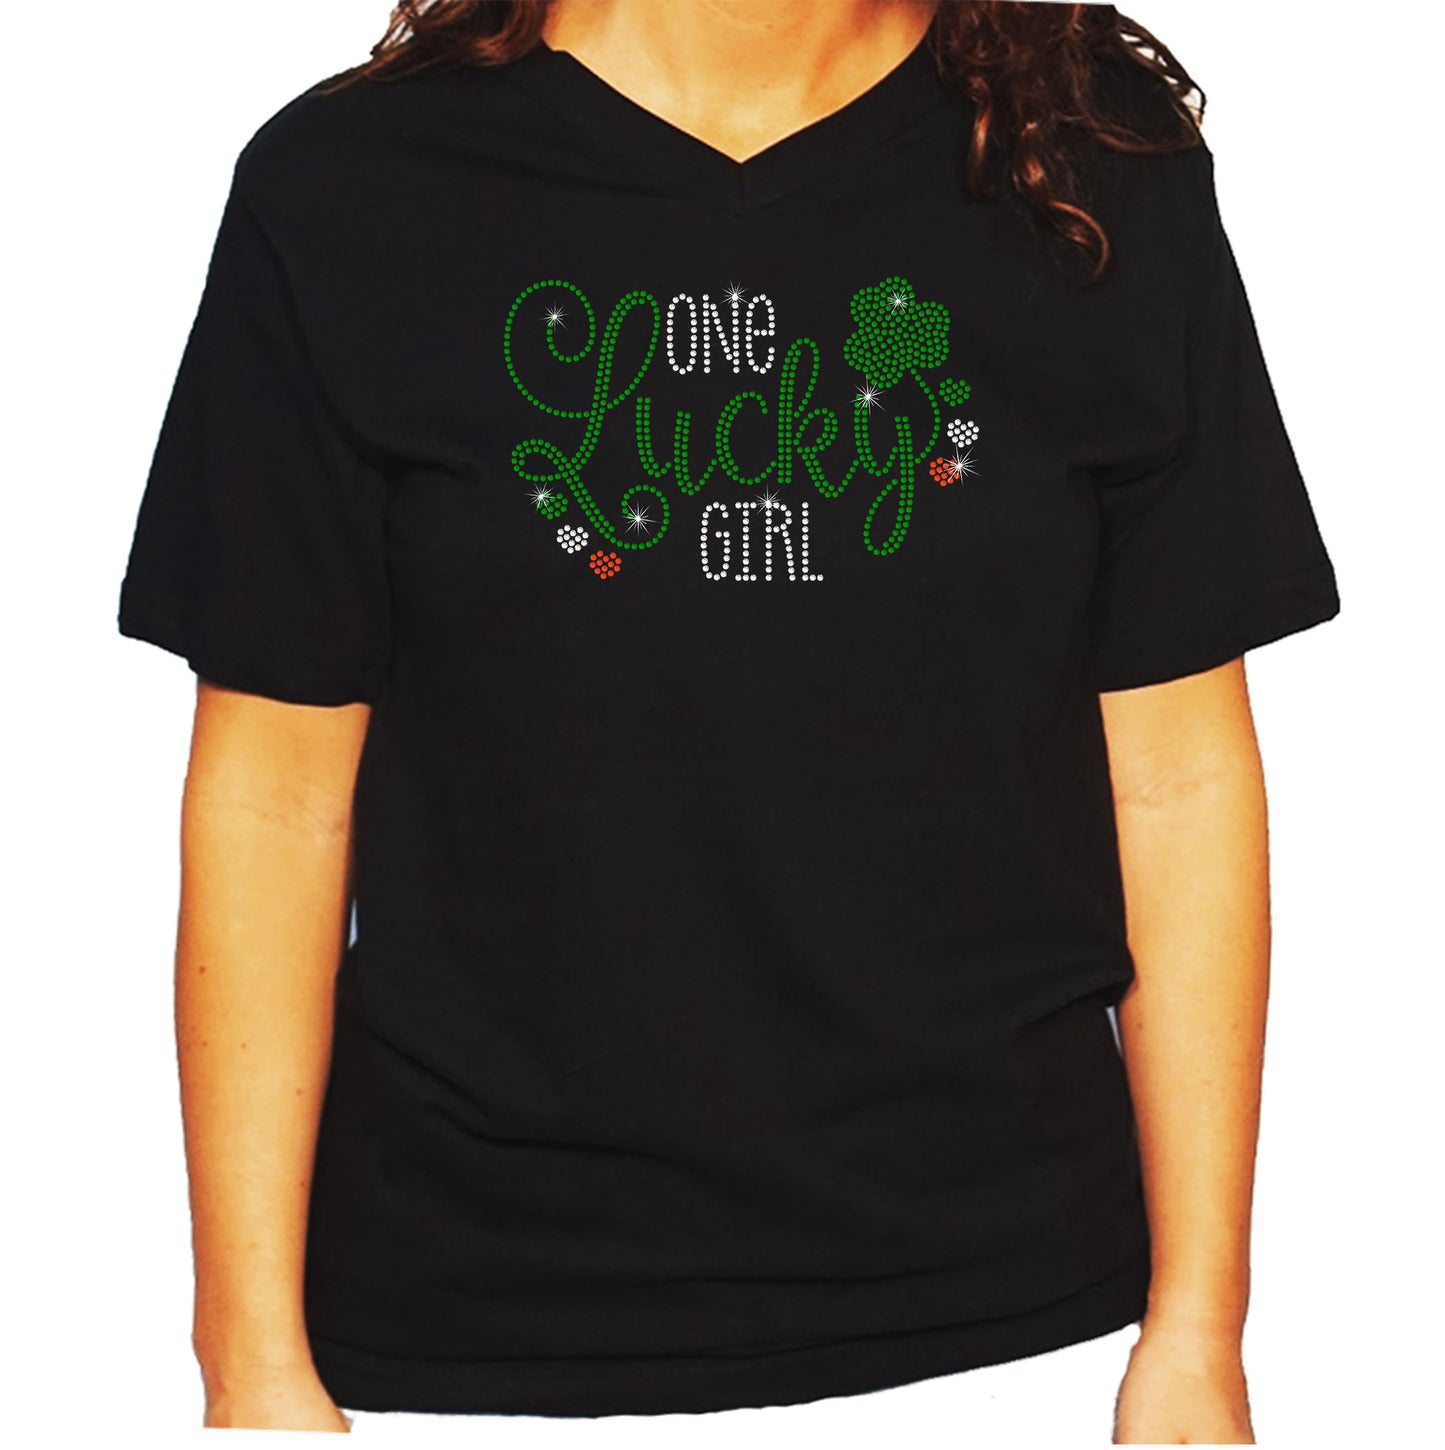 Women's/Unisex Rhinestone T-Shirt with One Lucky Girl with Clover - St. Patrics Day Shirt